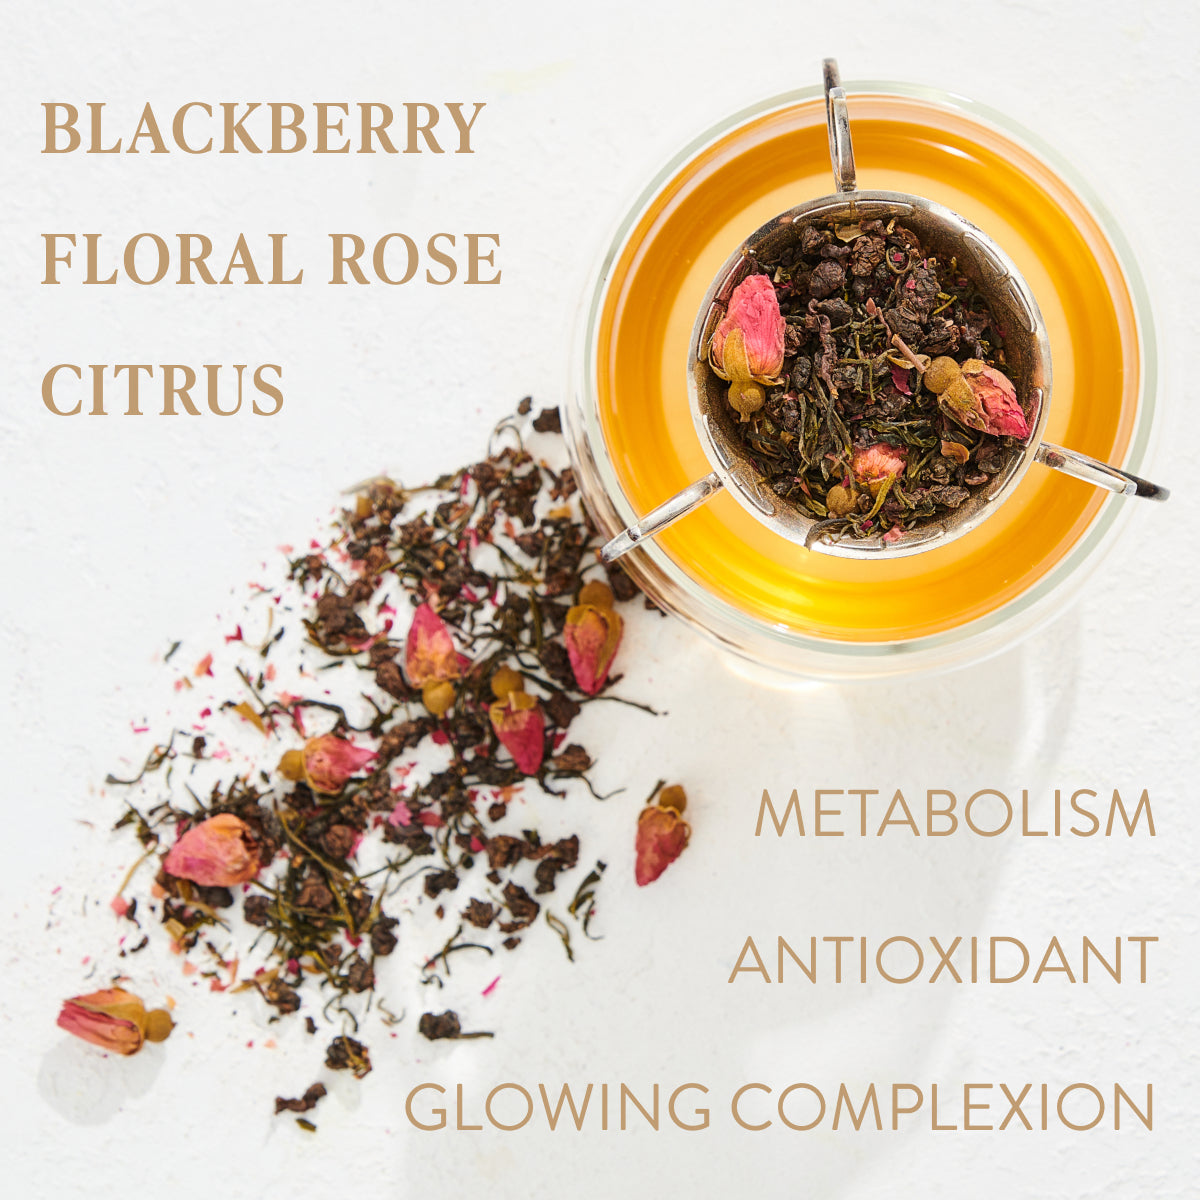 A glass cup filled with tea has a metal infuser containing Magic Hour's Aries - Garden of Eden Oolong loose leaf tea and rose buds. Dried tea leaves and rose petals are scattered beside the cup. Text reads: "BLACKBERRY, FLORAL, ROSE, CITRUS, METABOLISM, ANTIOXIDANT, GLOWING COMPLEXION.